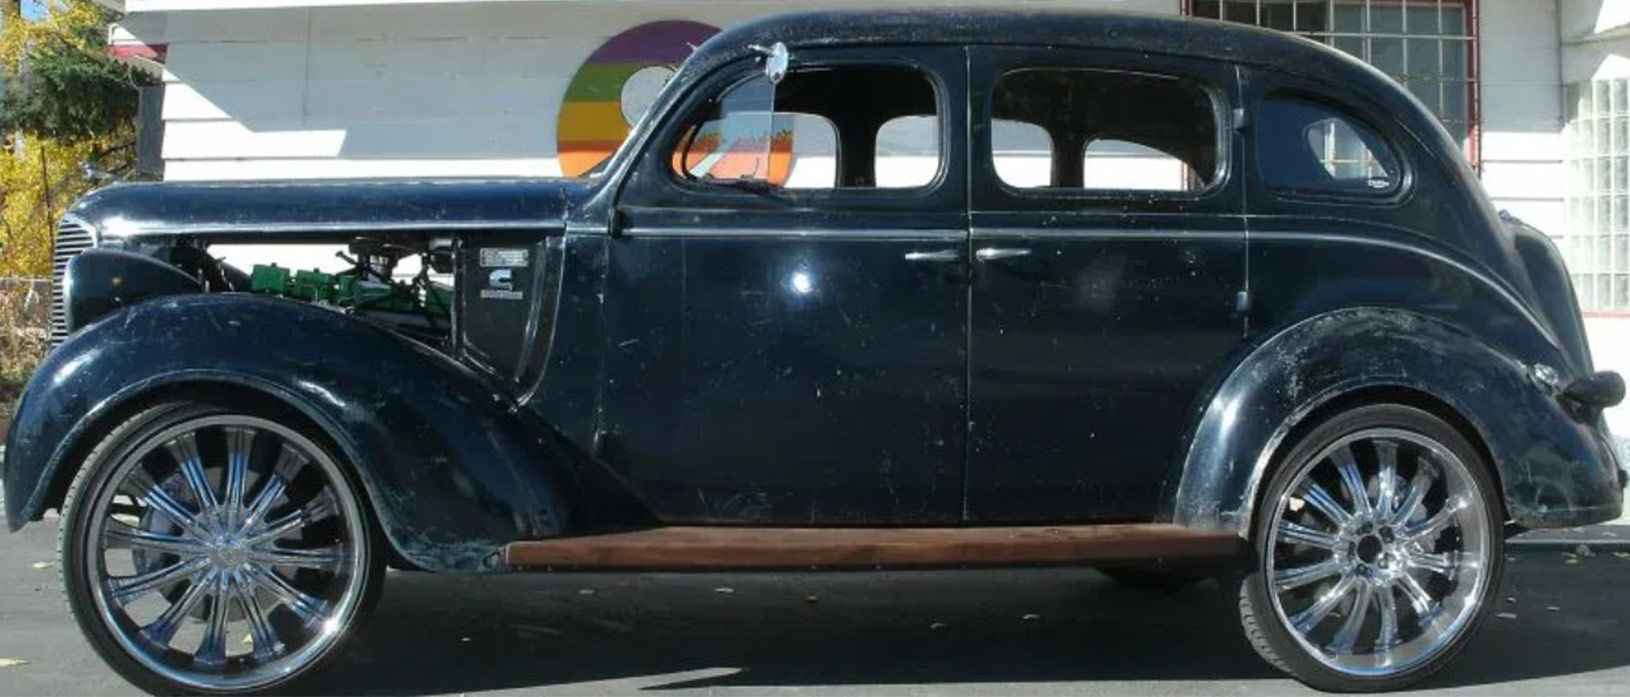 There’s More to this 1938 Dodge Sedan Than What Meets the Eye